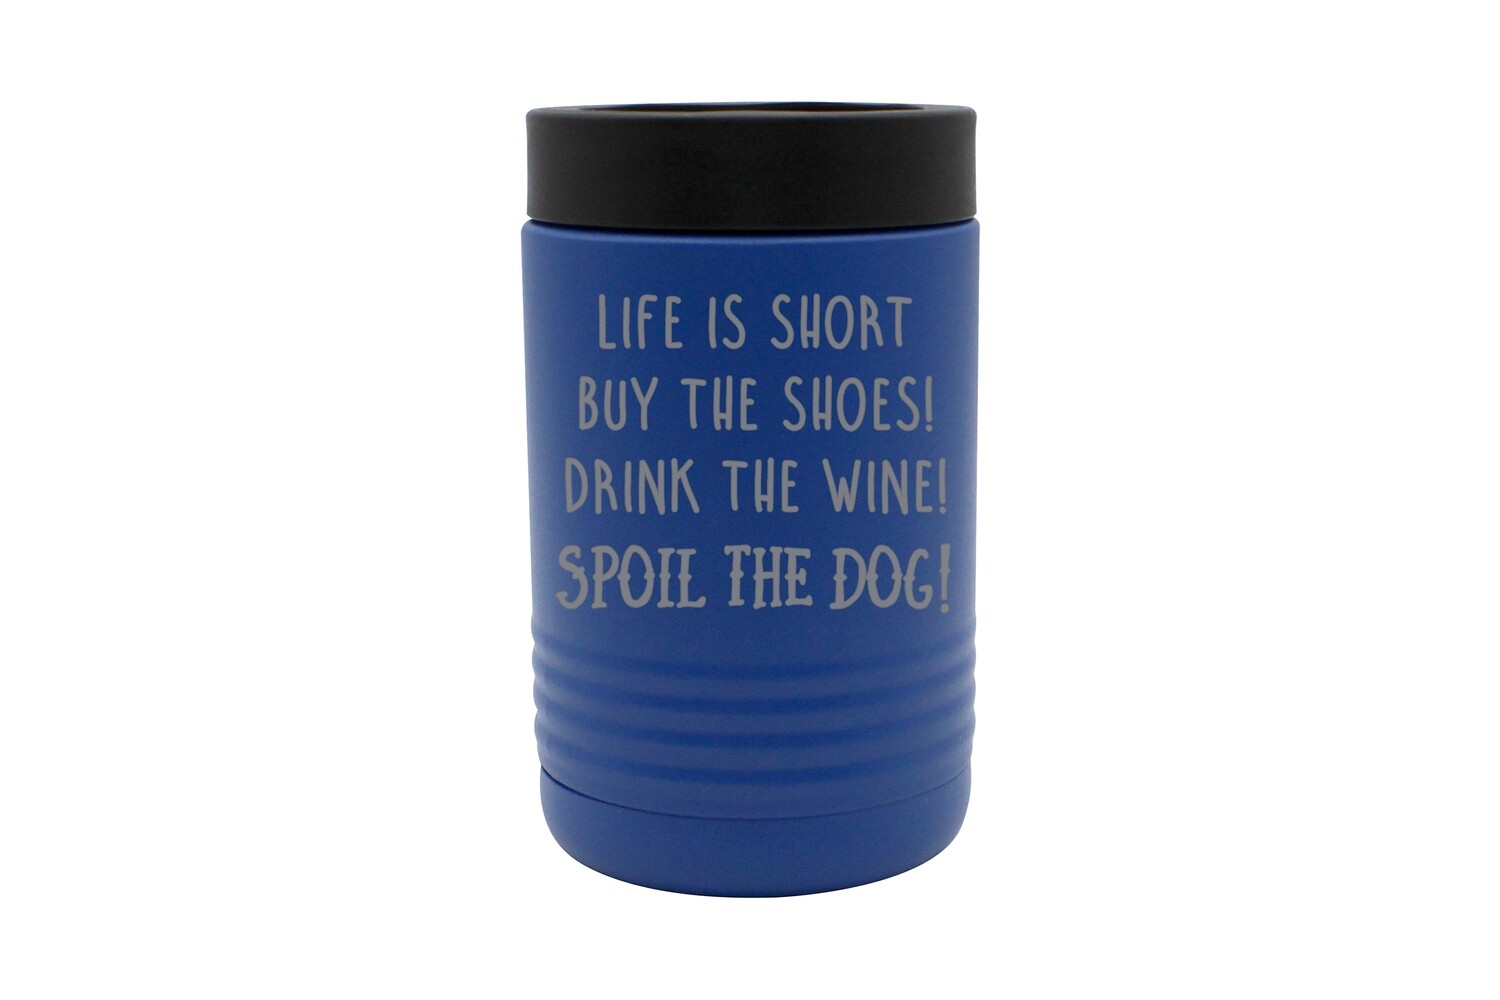 Life is Short - Spoil the Dog Saying Insulated Beverage Holder